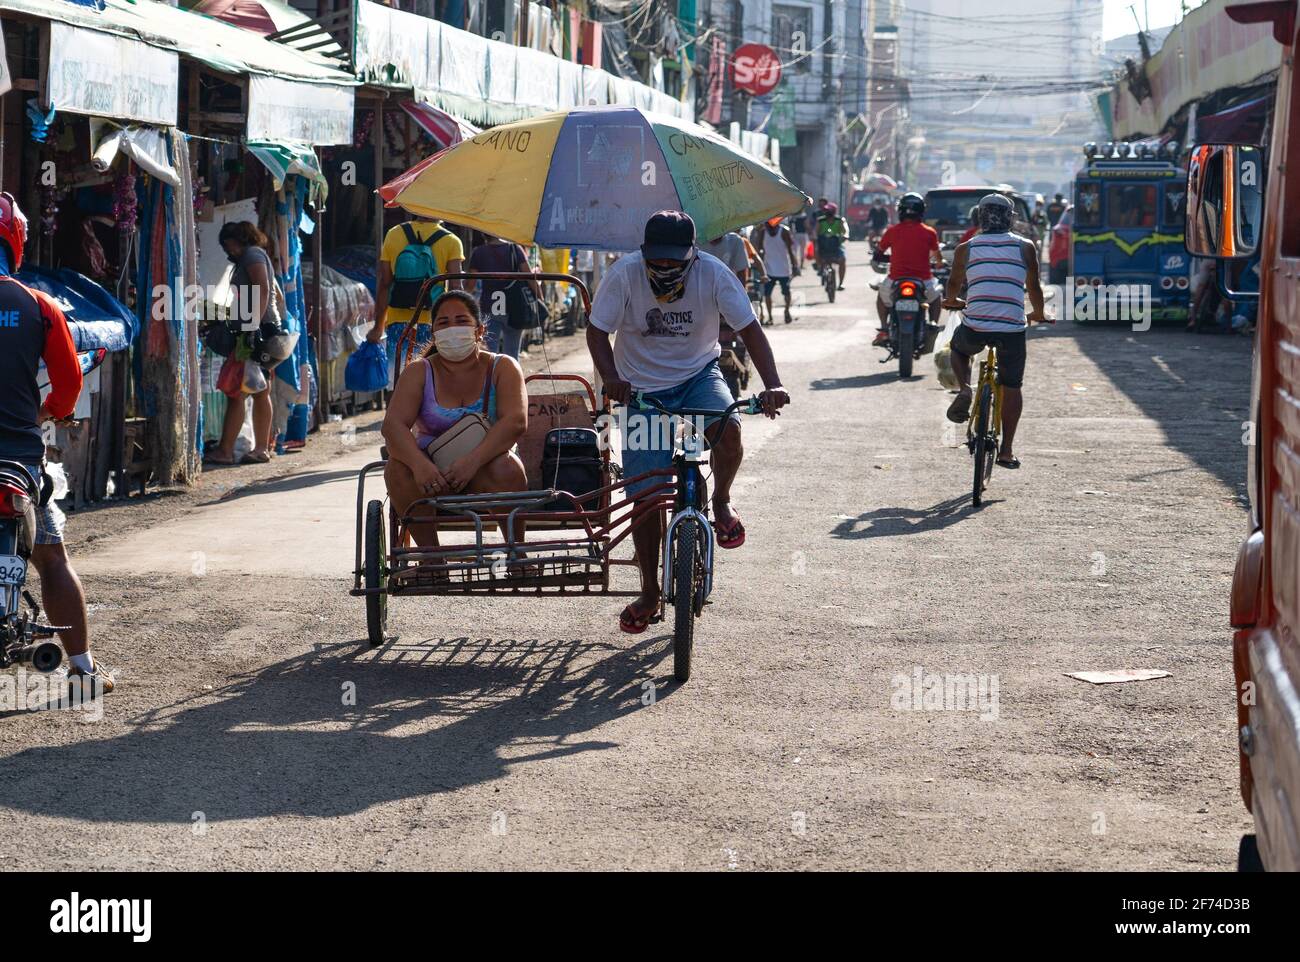 A woman being transported in a tricycle through a market area of Cebu City, Philippines Stock Photo